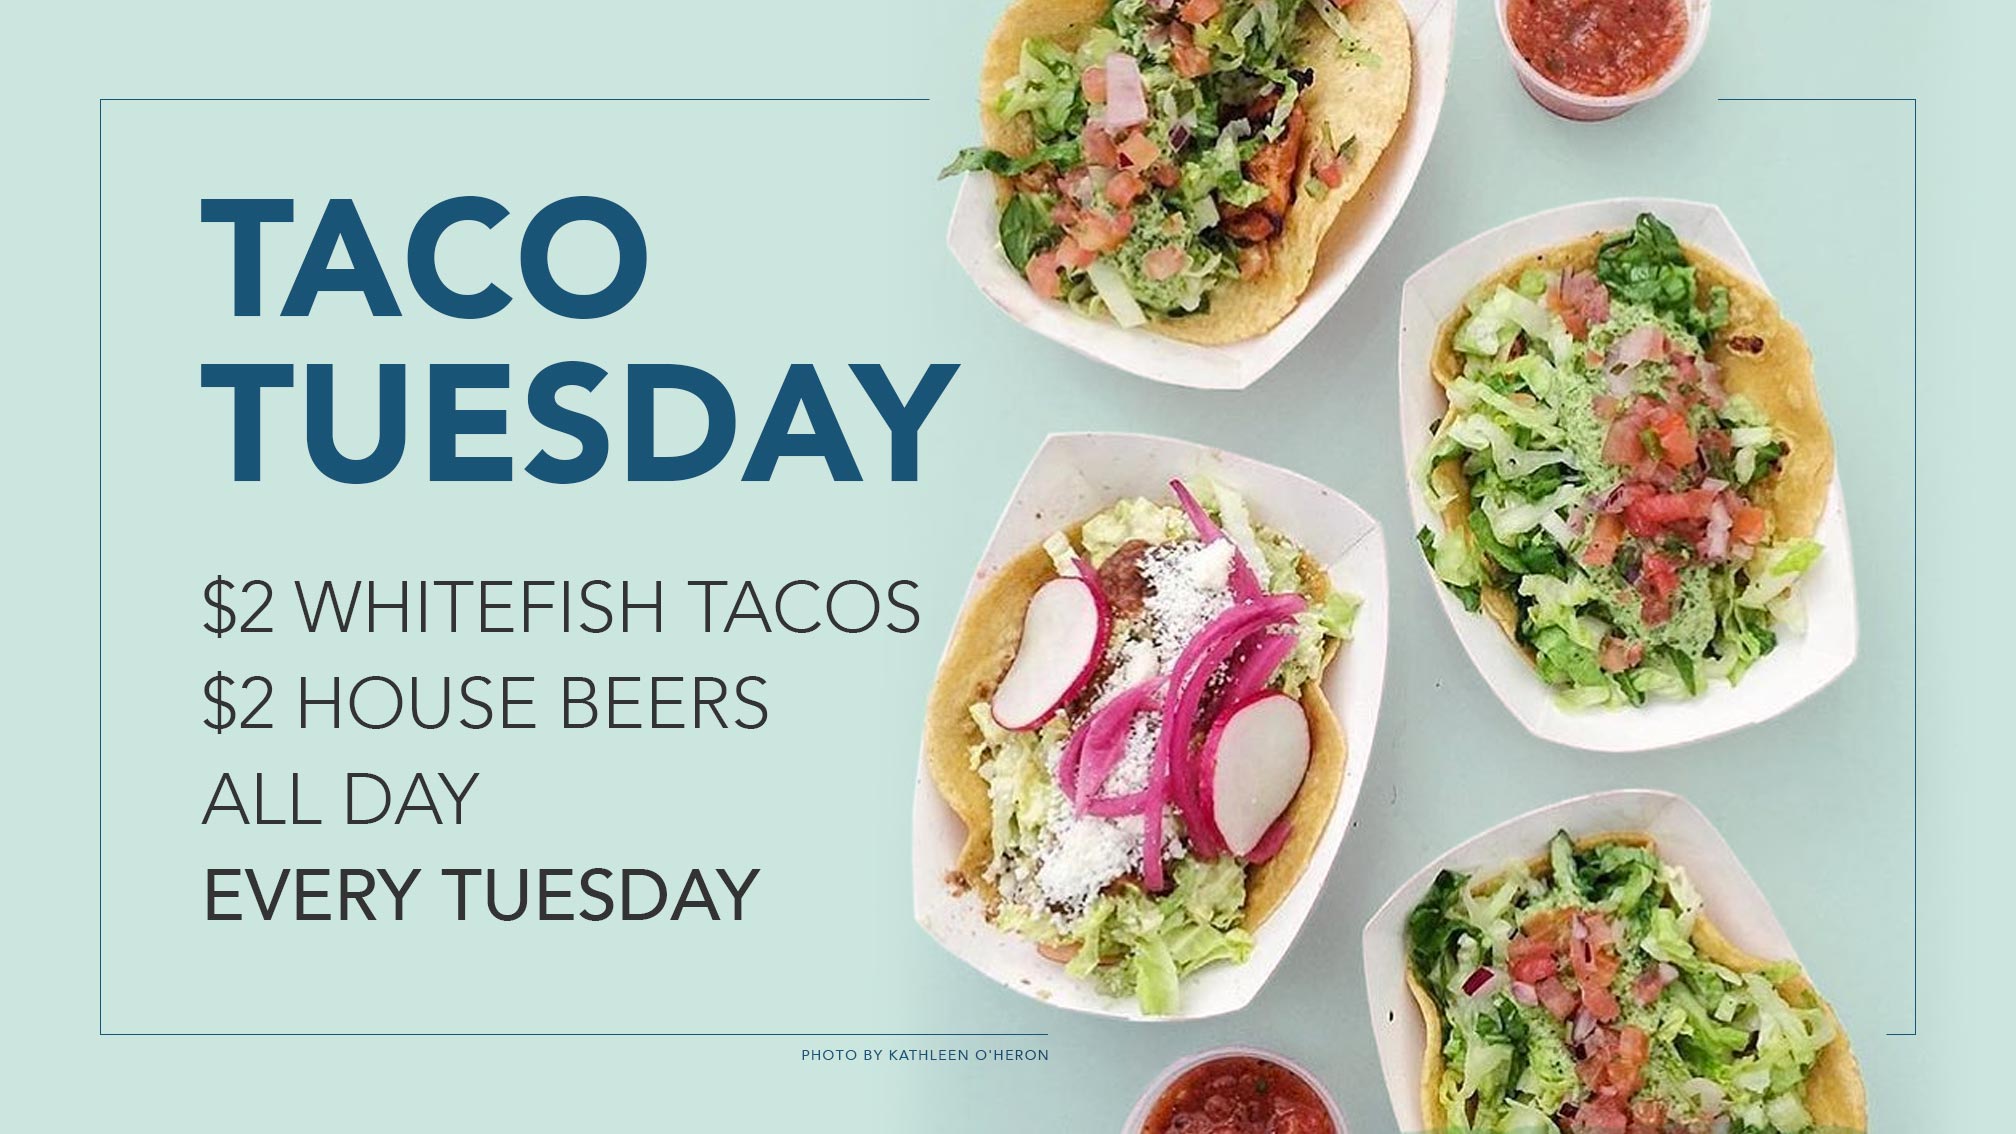 Taco Tuesday! $2 whitefish tacos, $2 house beers, all day every tuesday